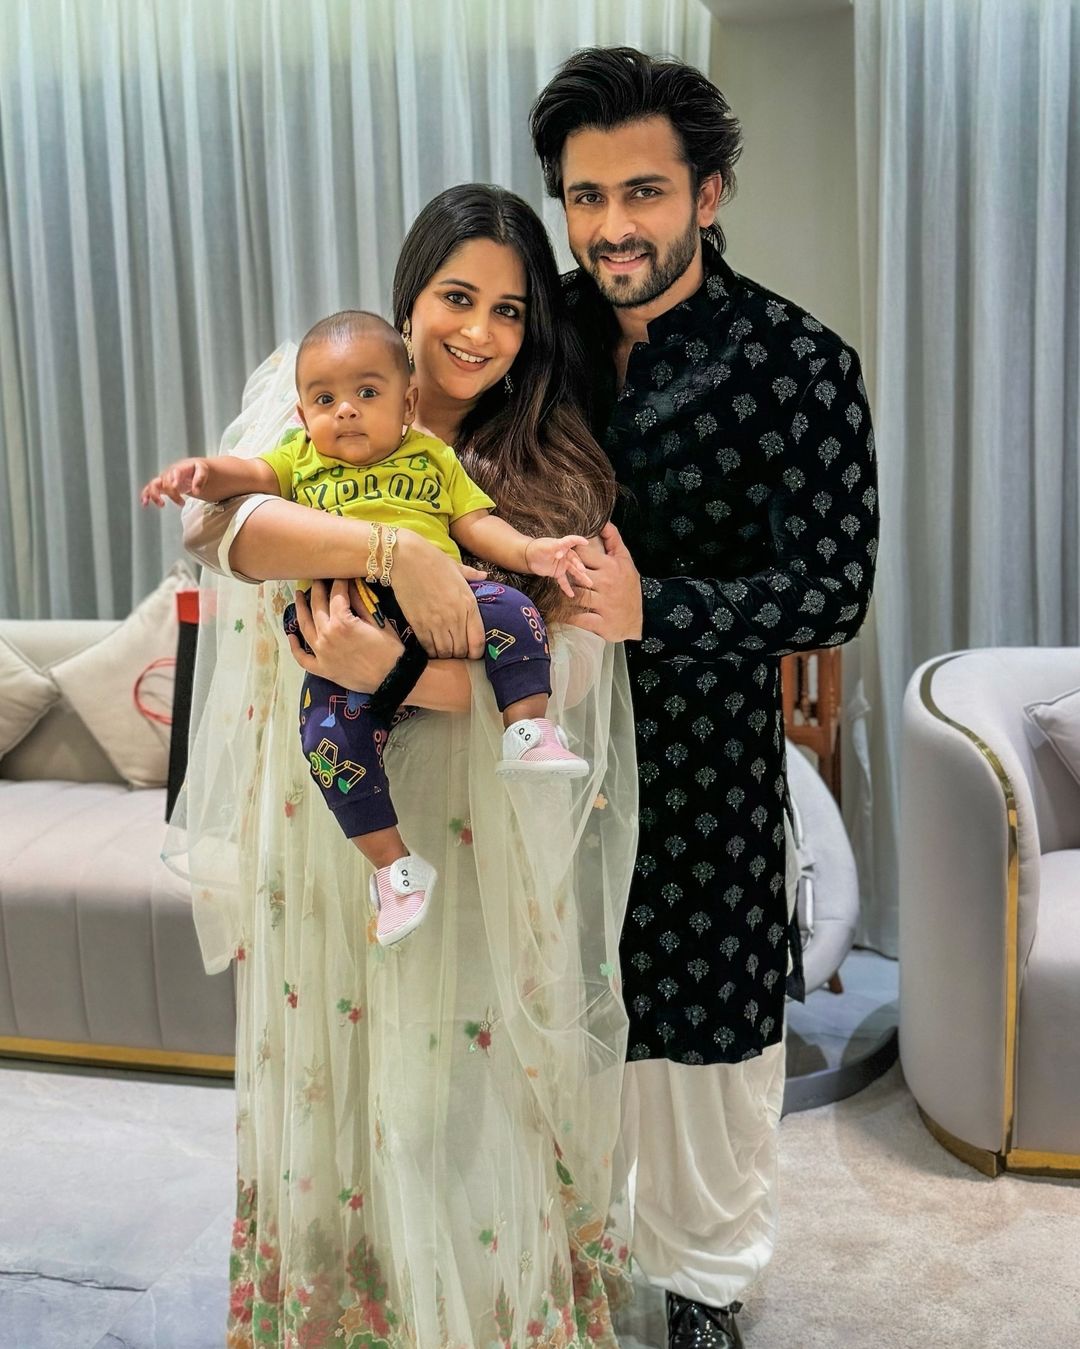 Actress Dipika Kakar Enjoyed A Cup Of Chai When Shoaib Put Their Baby Ruhaan To Sleep. They Shared A Cute Video!